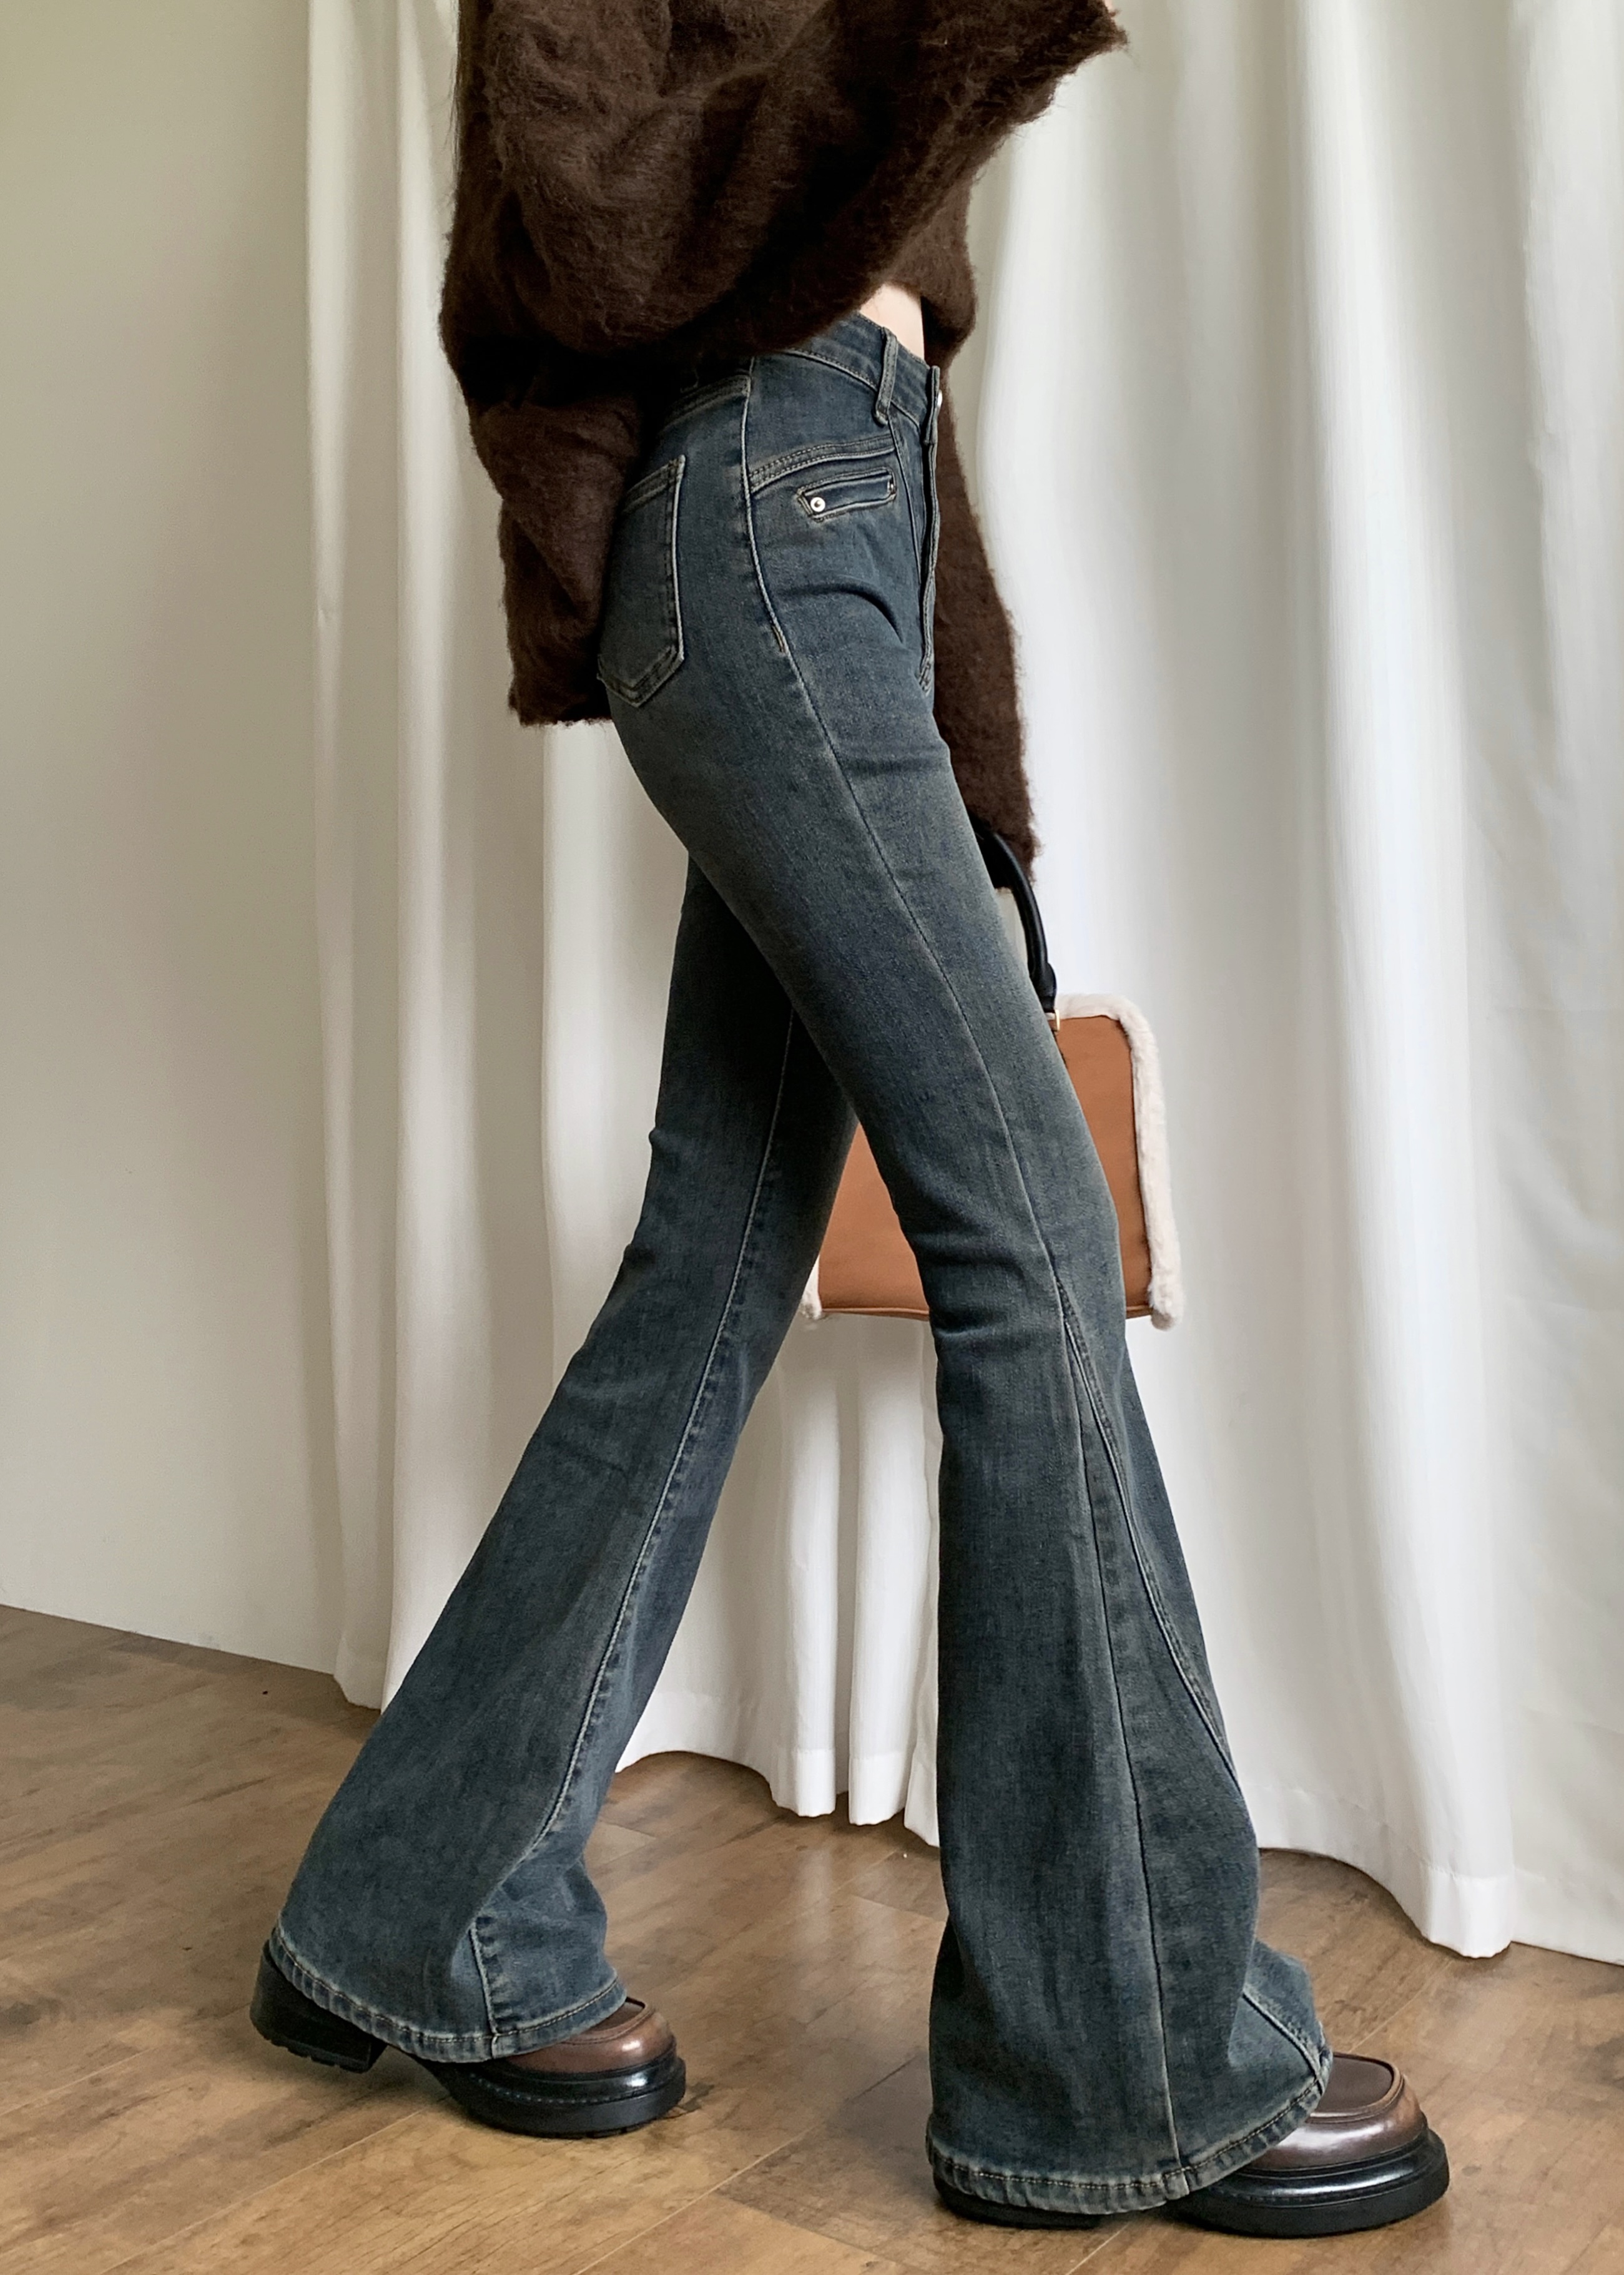 Actual shot ~ Retro distressed slim-fit bootcut jeans, American high street mid-high waist floor-length flared pants